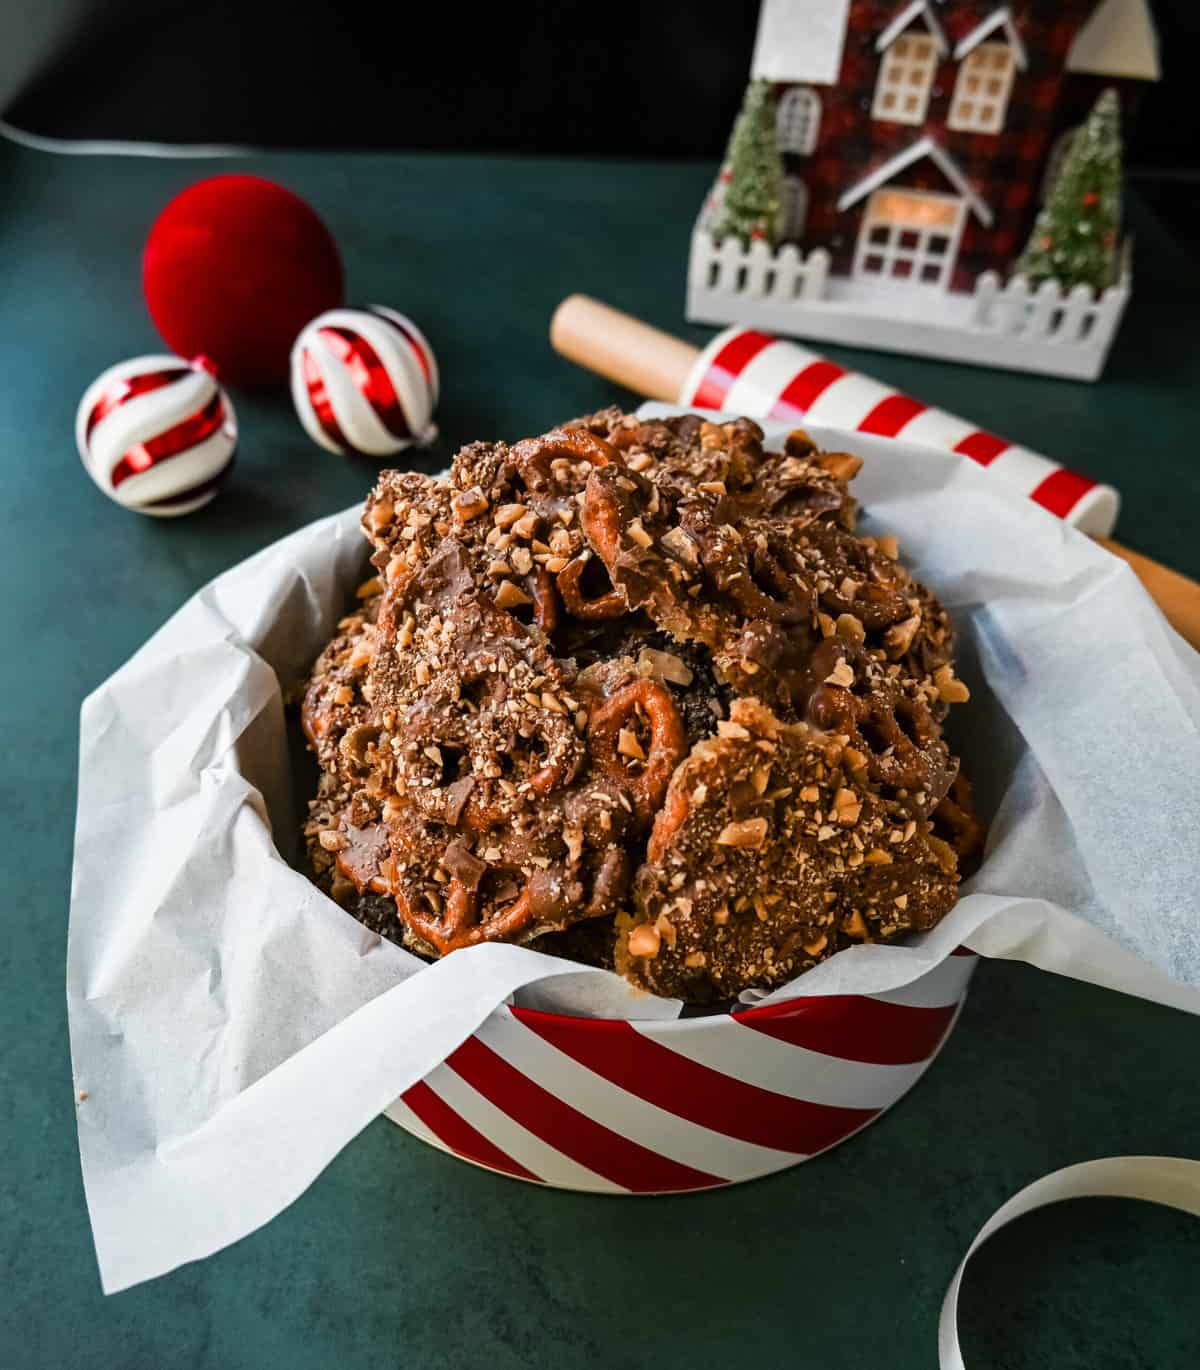 Toffee Pretzel Christmas Crack. This is Christmas Crack but even better! This homemade chocolate toffee bark is made with crunchy pretzels, soft buttery toffee, rich chocolate, and Heath bar chocolate toffee bits. This is a super easy Christmas crack recipe and perfect to share around the holidays in goodie tin or box.